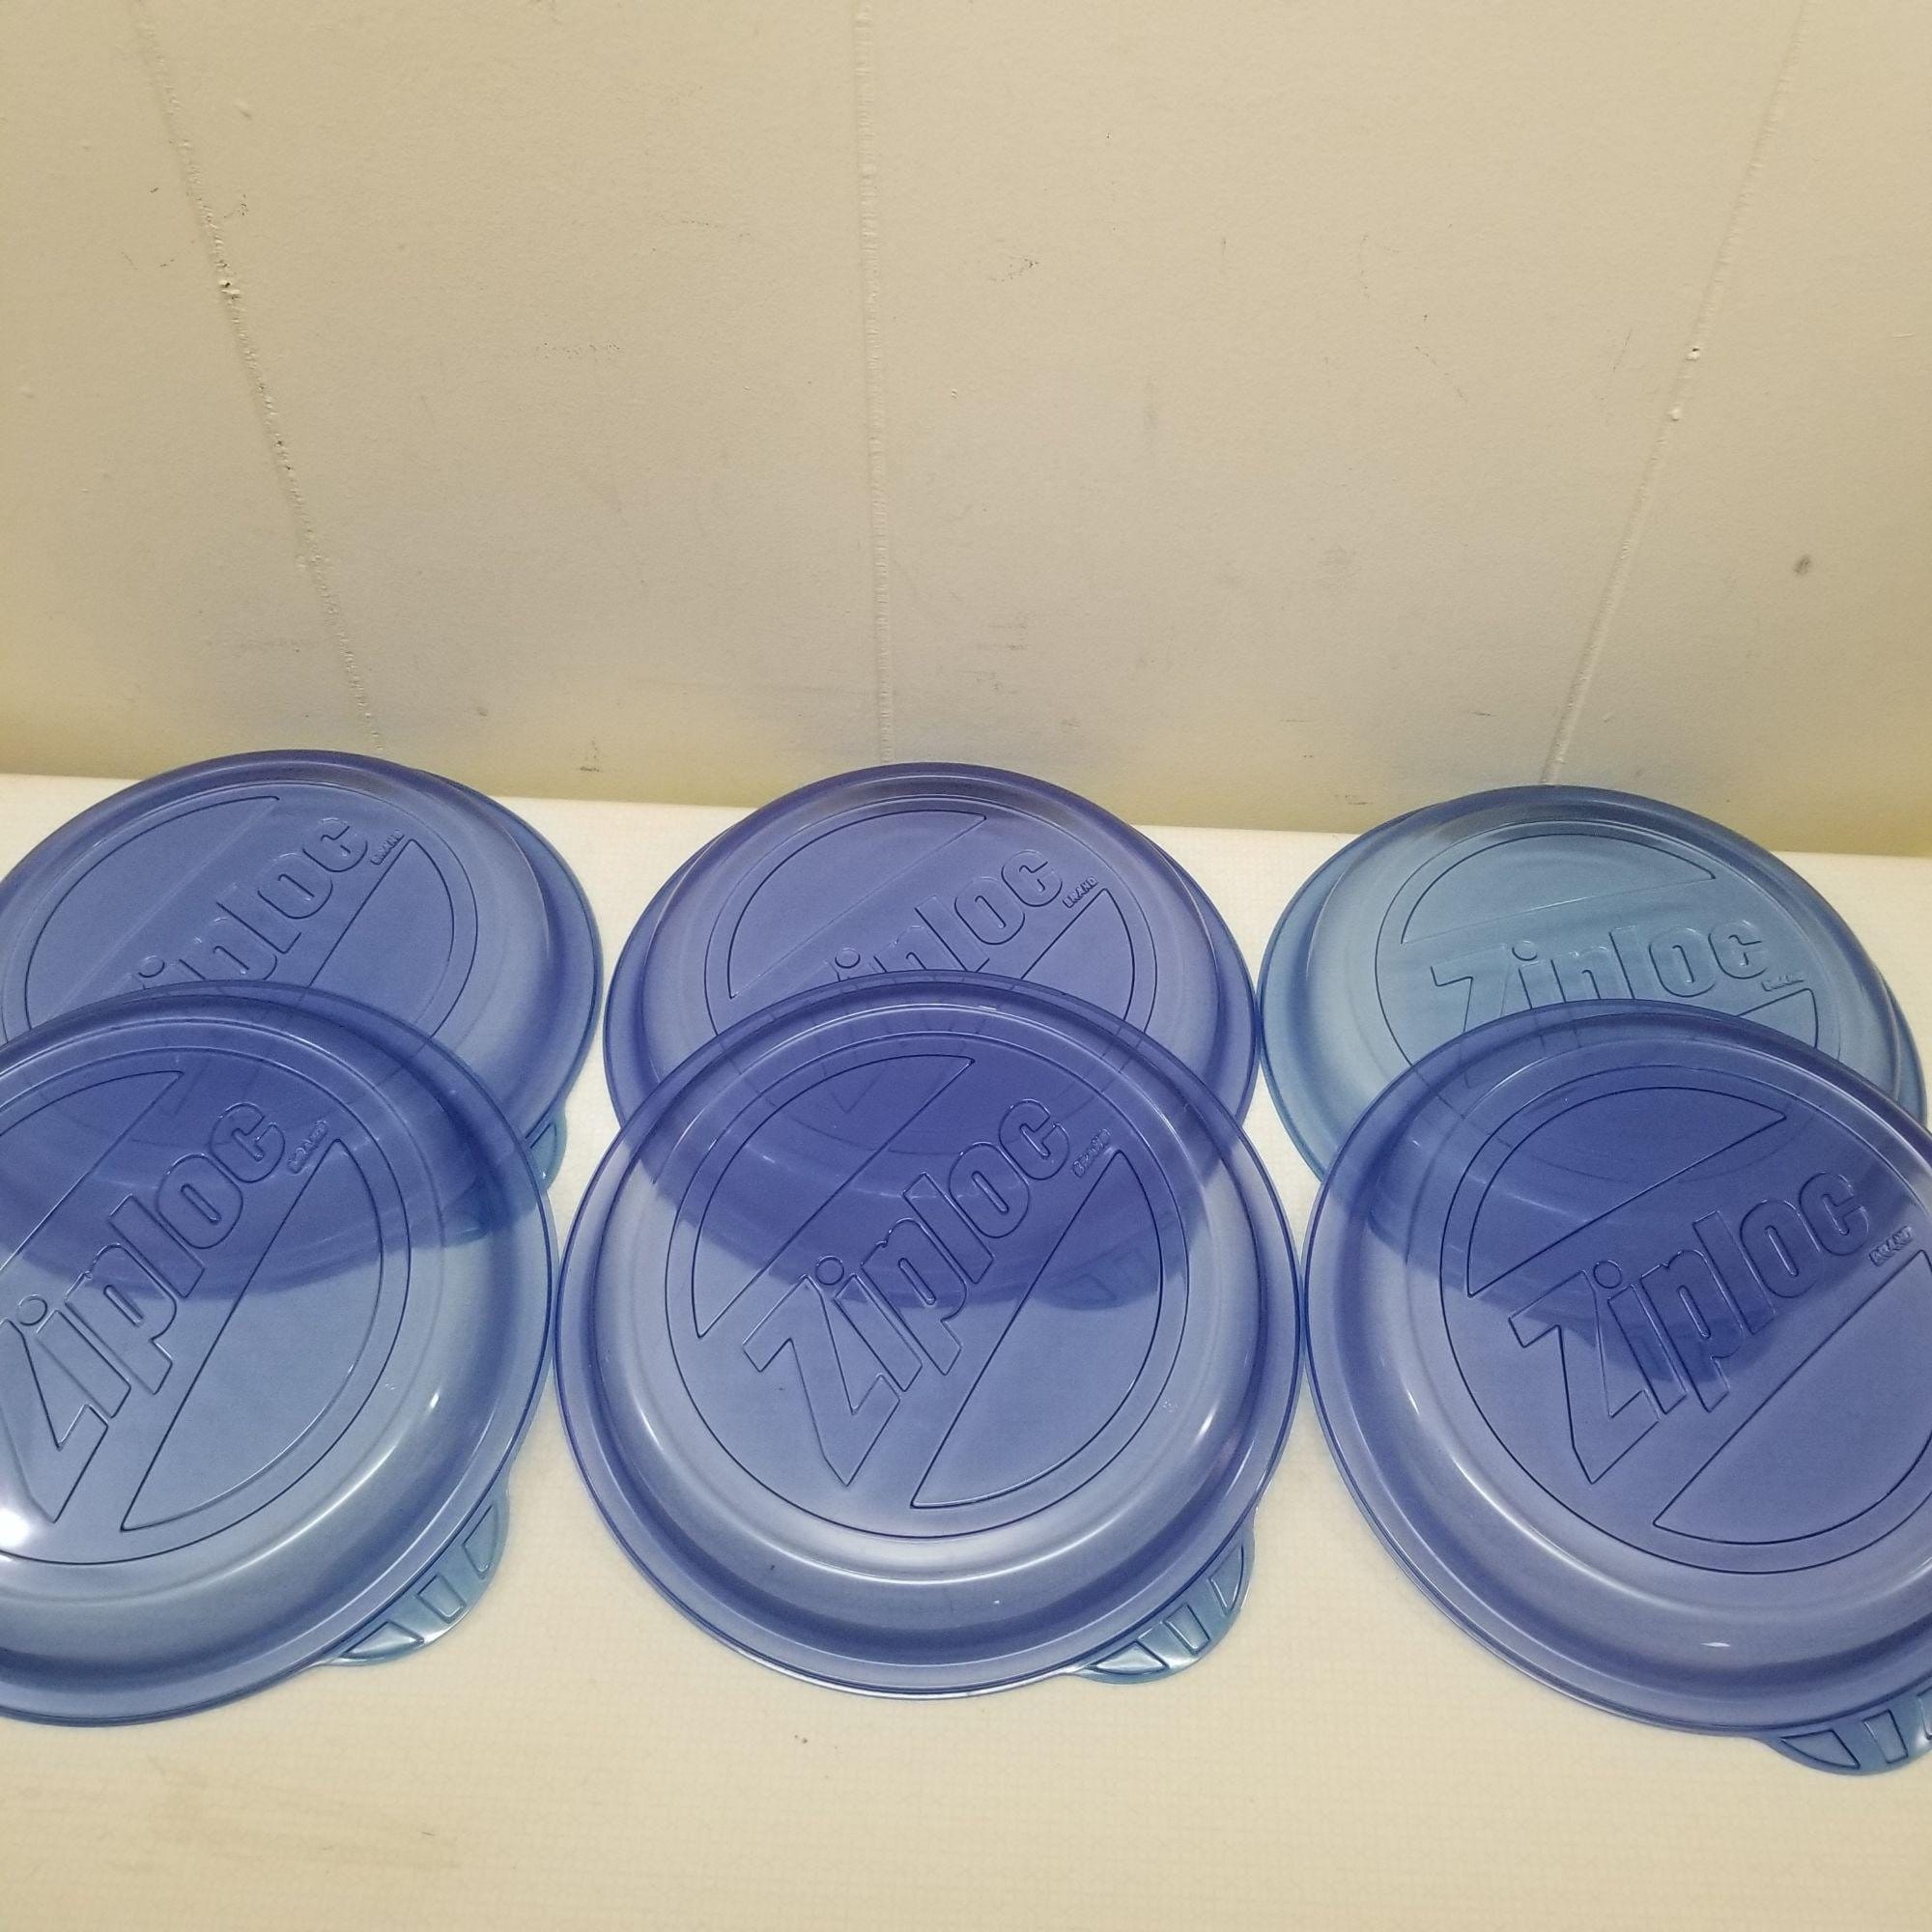 The Circle on Ziploc Container Lids Is Actually Another Lid